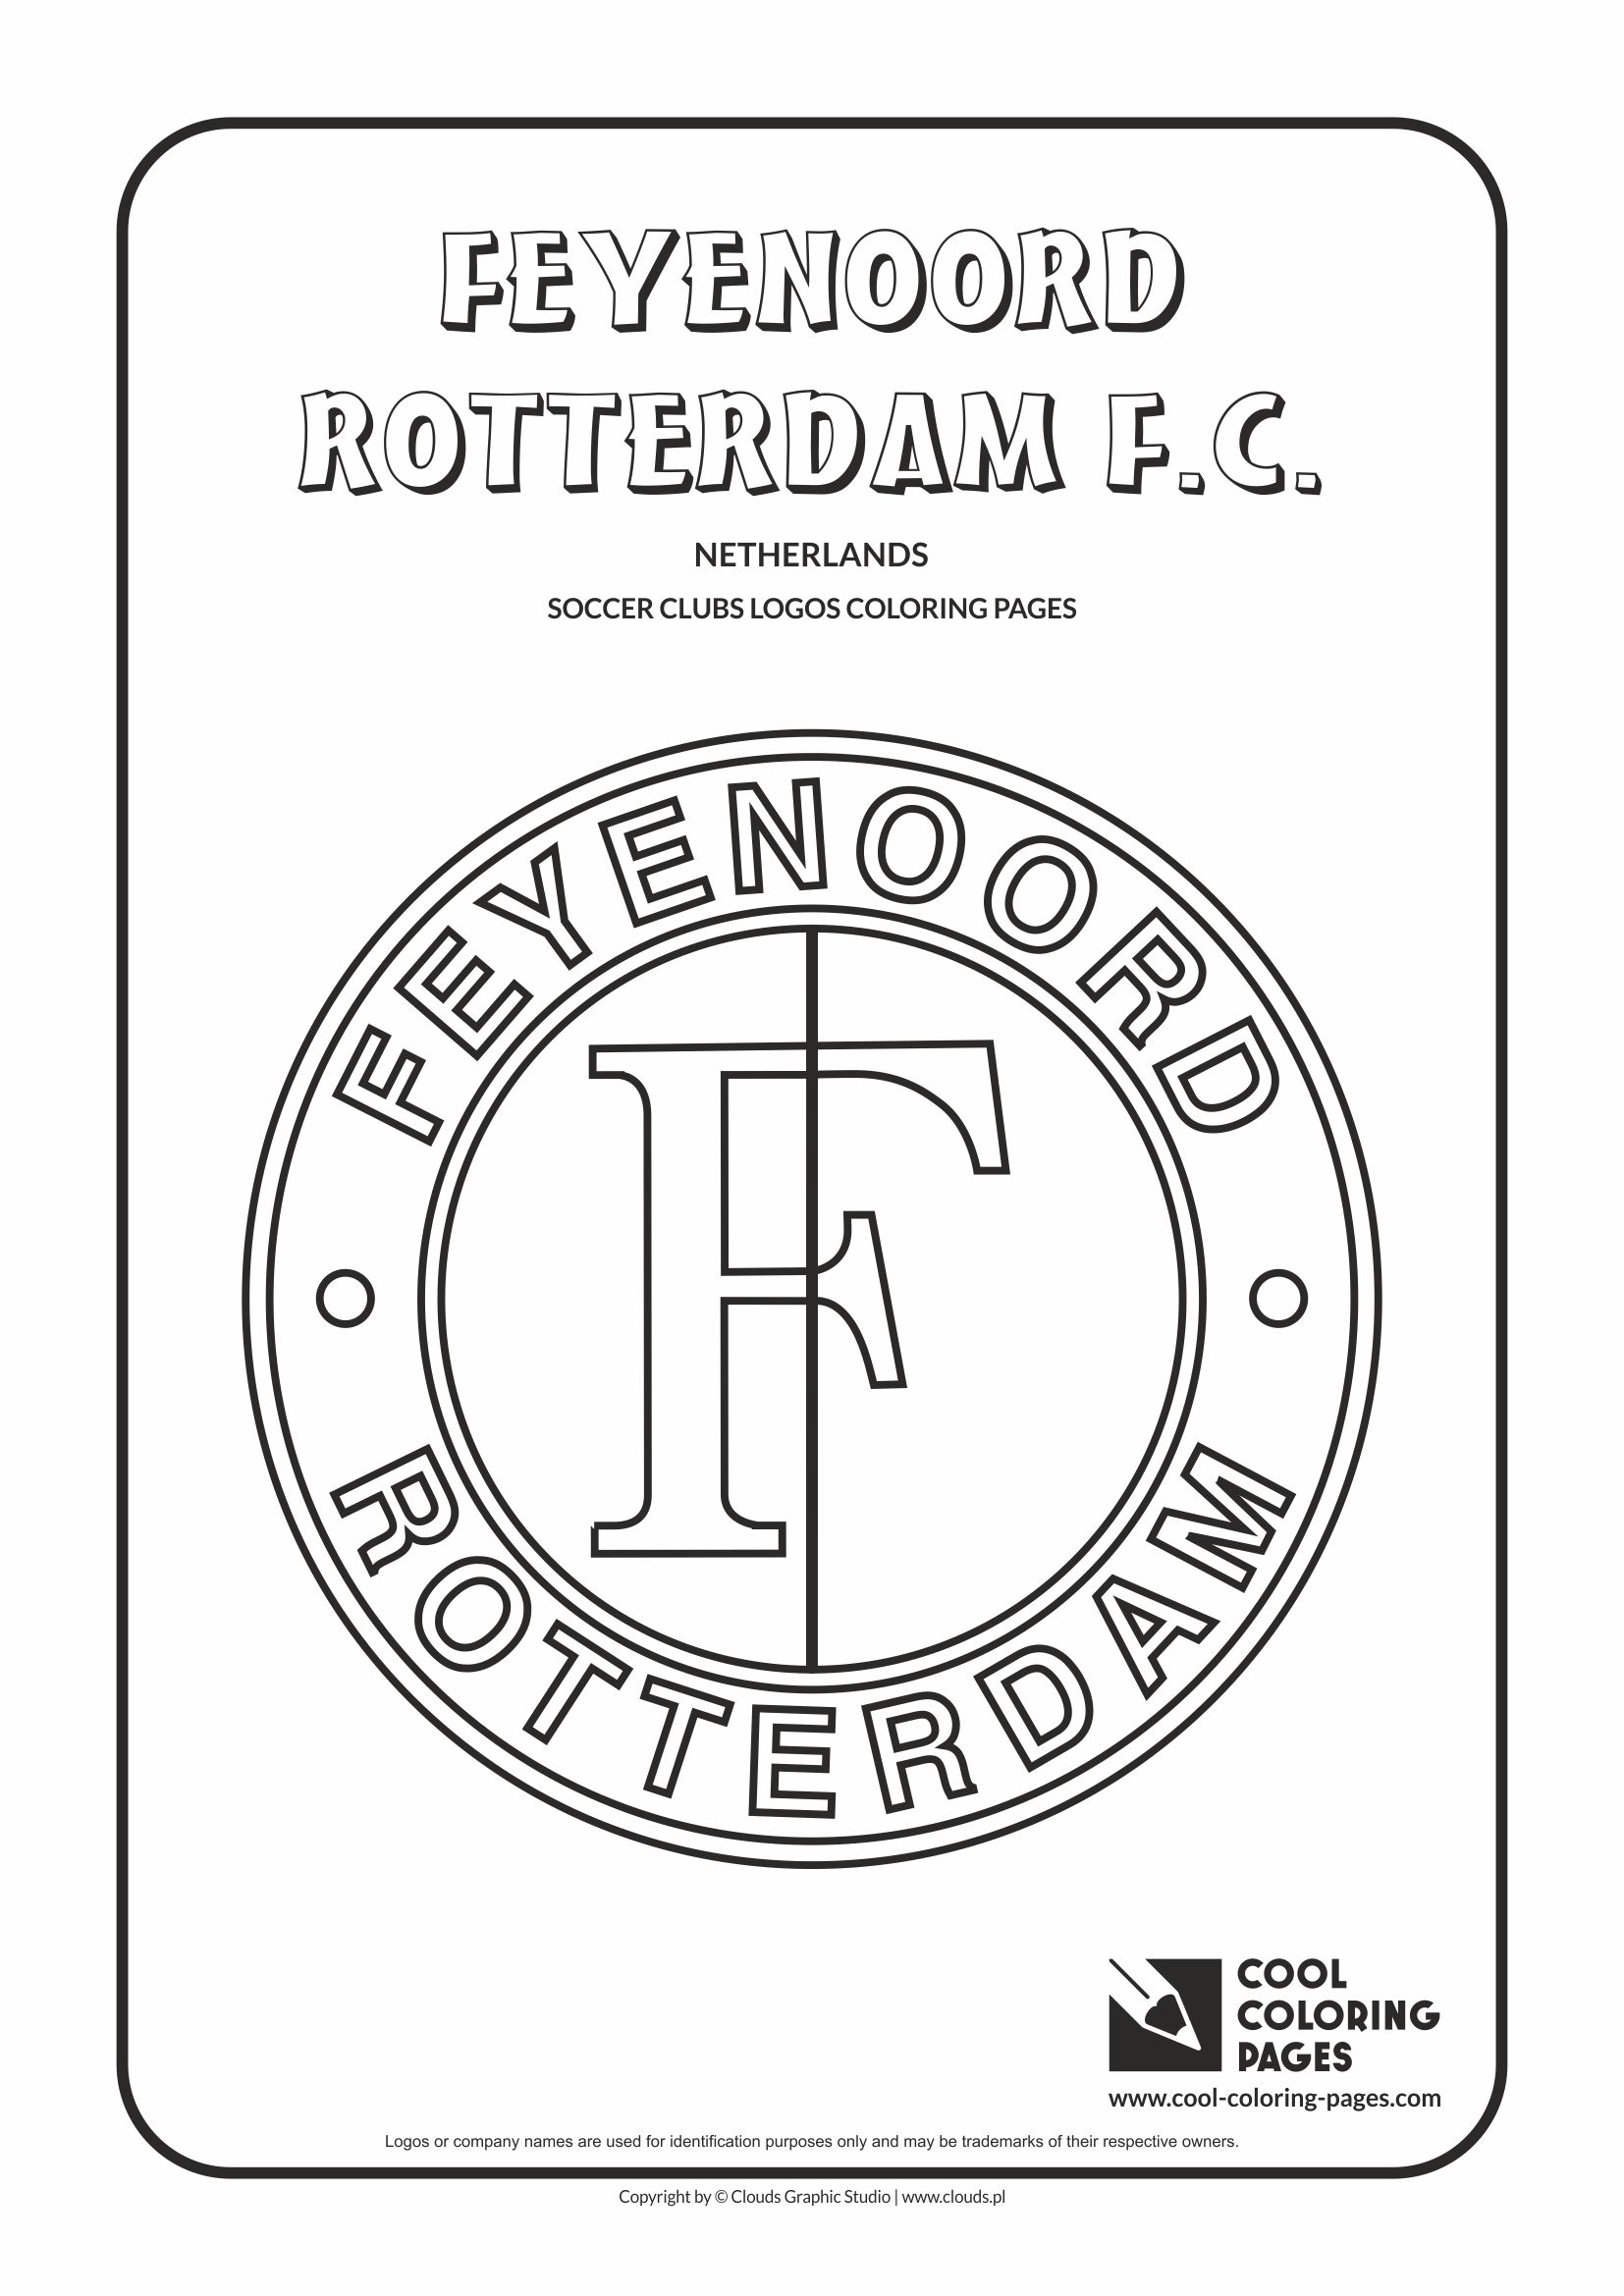 Cool Coloring Pages - Soccer Clubs Logos / Feyenoord Rotterdam logo / Coloring page with Feyenoord Rotterdam logo